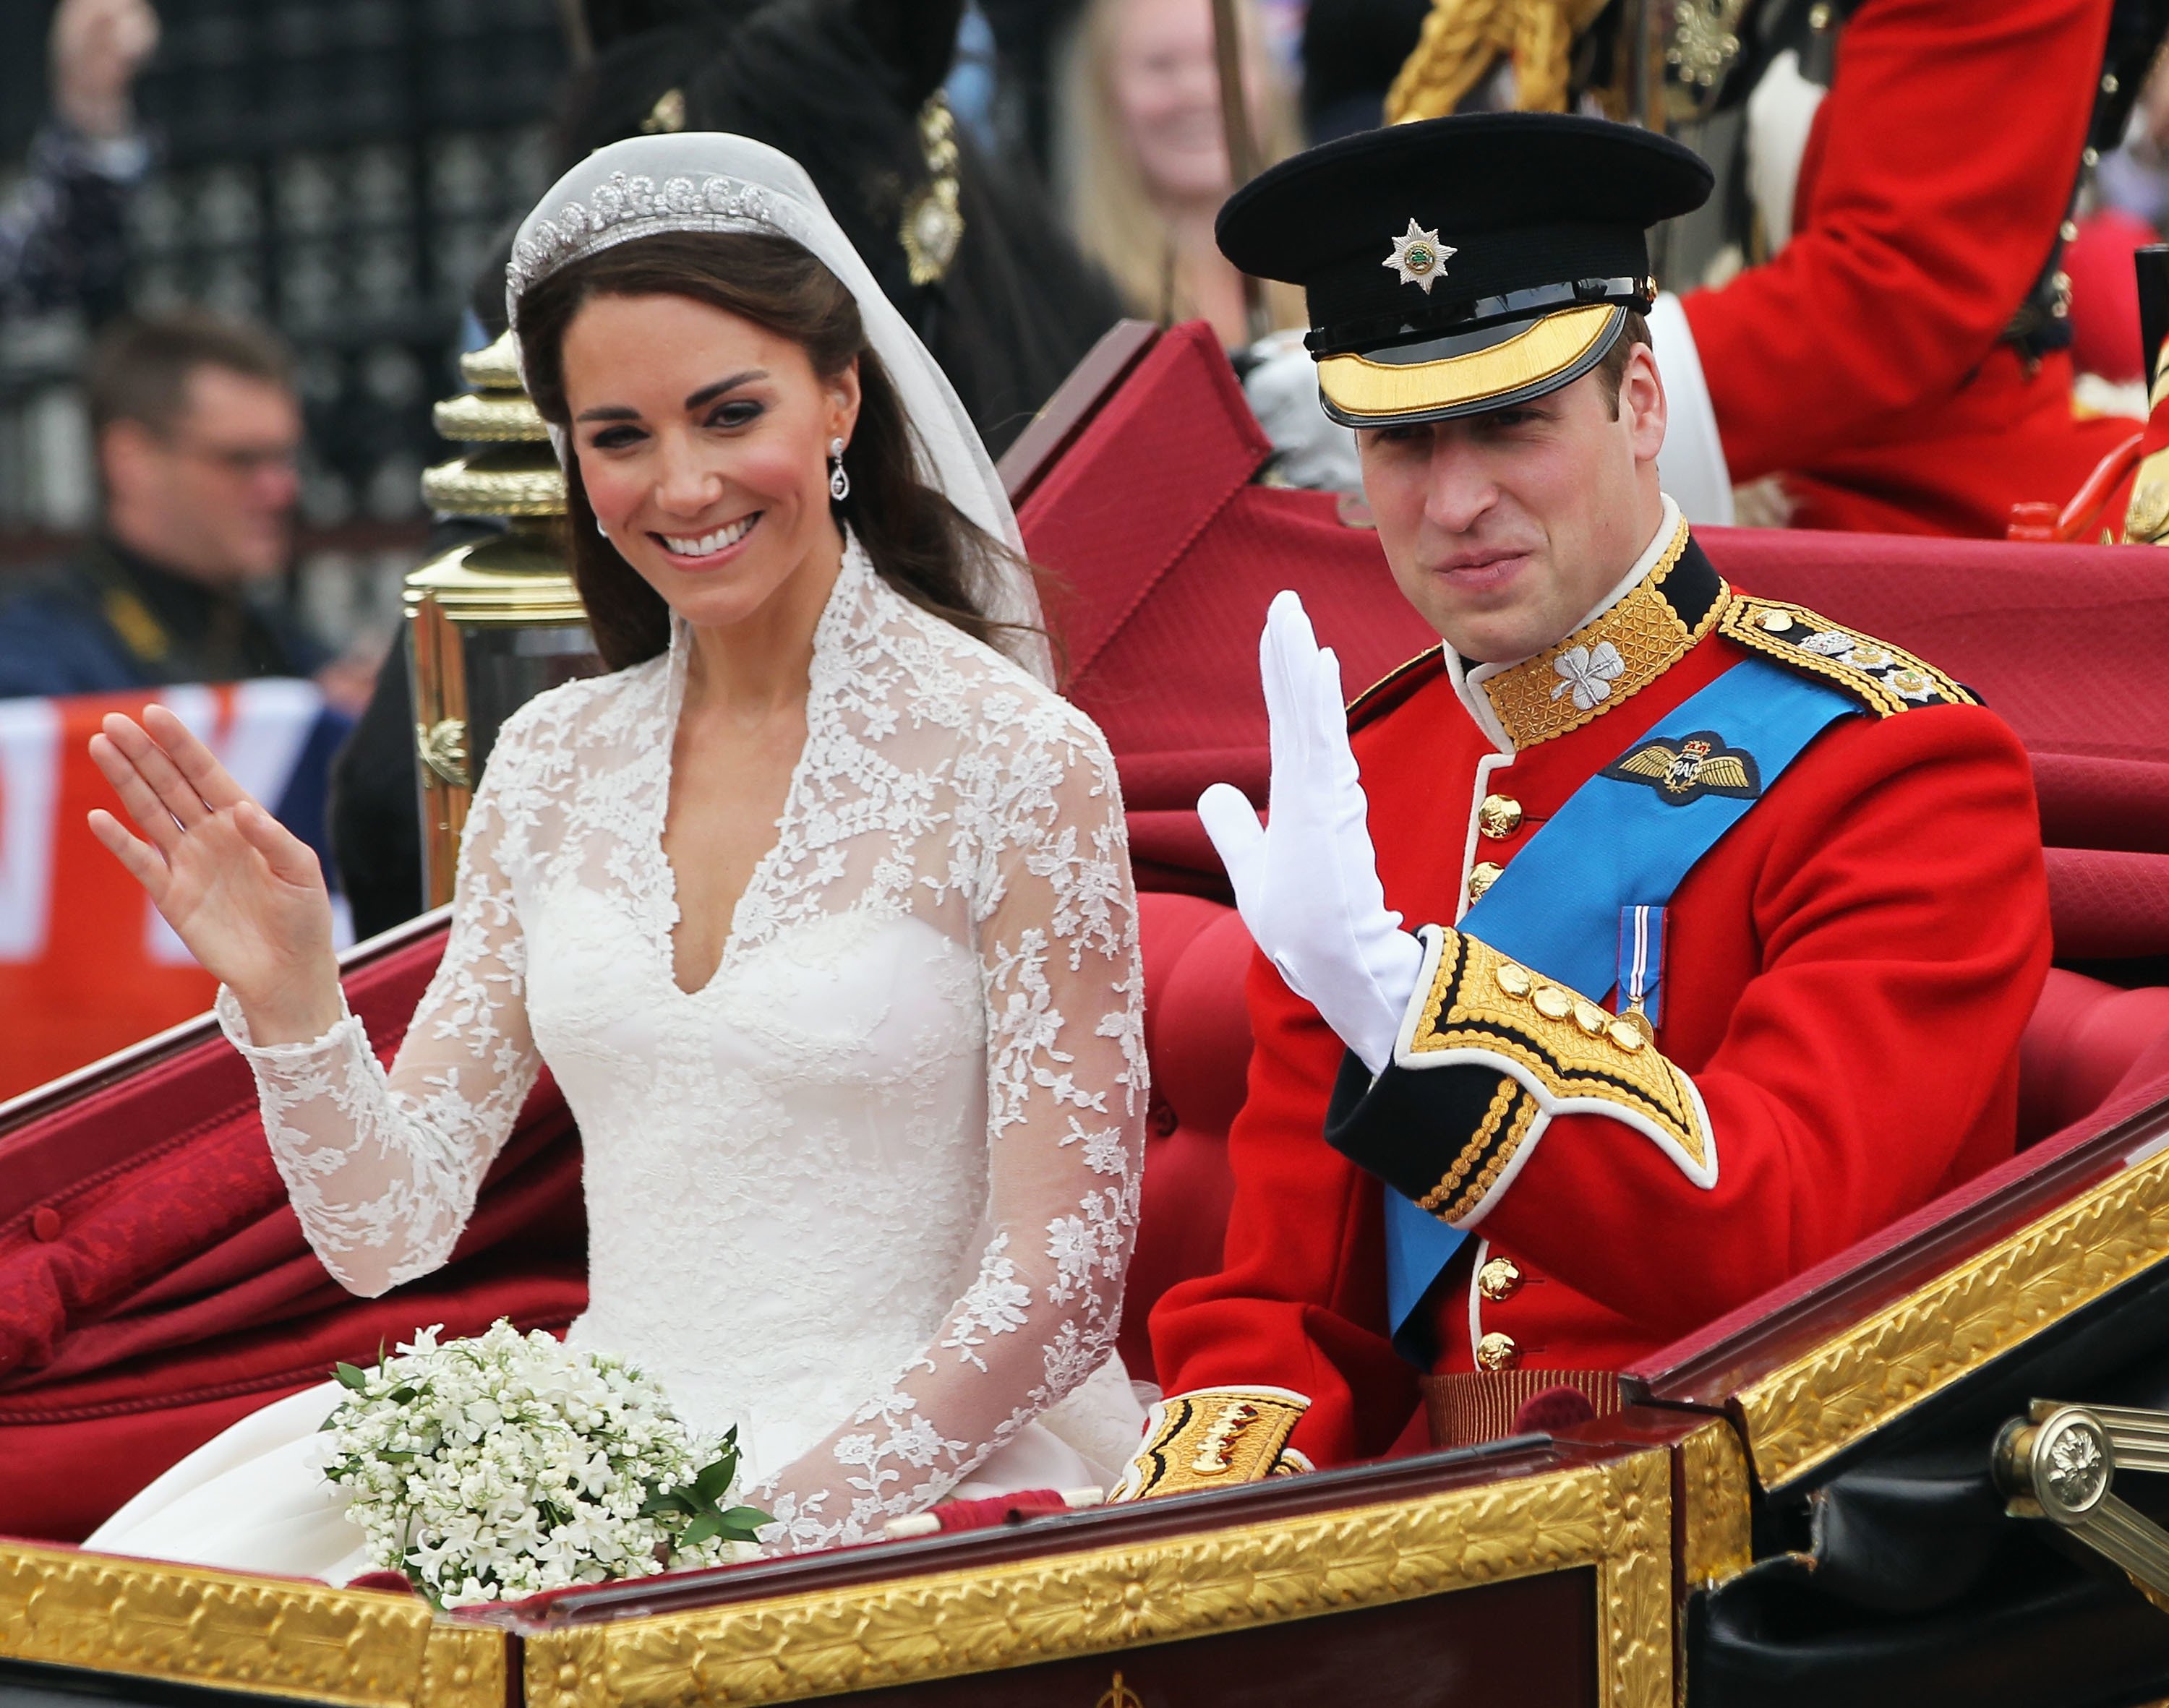 Prince William and Kate Middleton's 10th Wedding